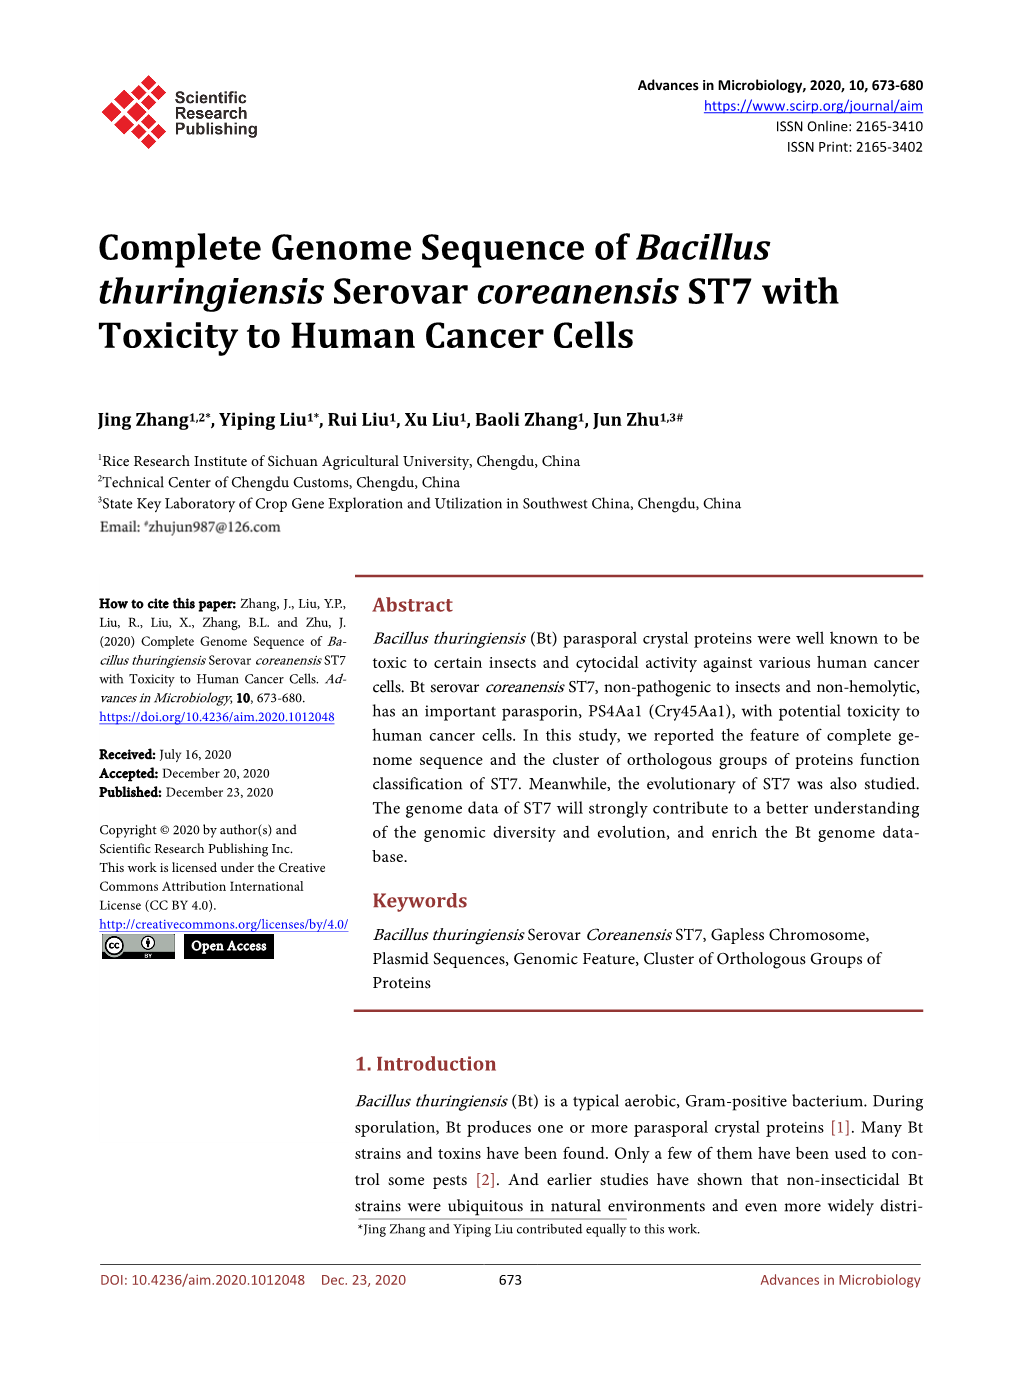 Complete Genome Sequence of Bacillus Thuringiensis Serovar Coreanensis ST7 with Toxicity to Human Cancer Cells